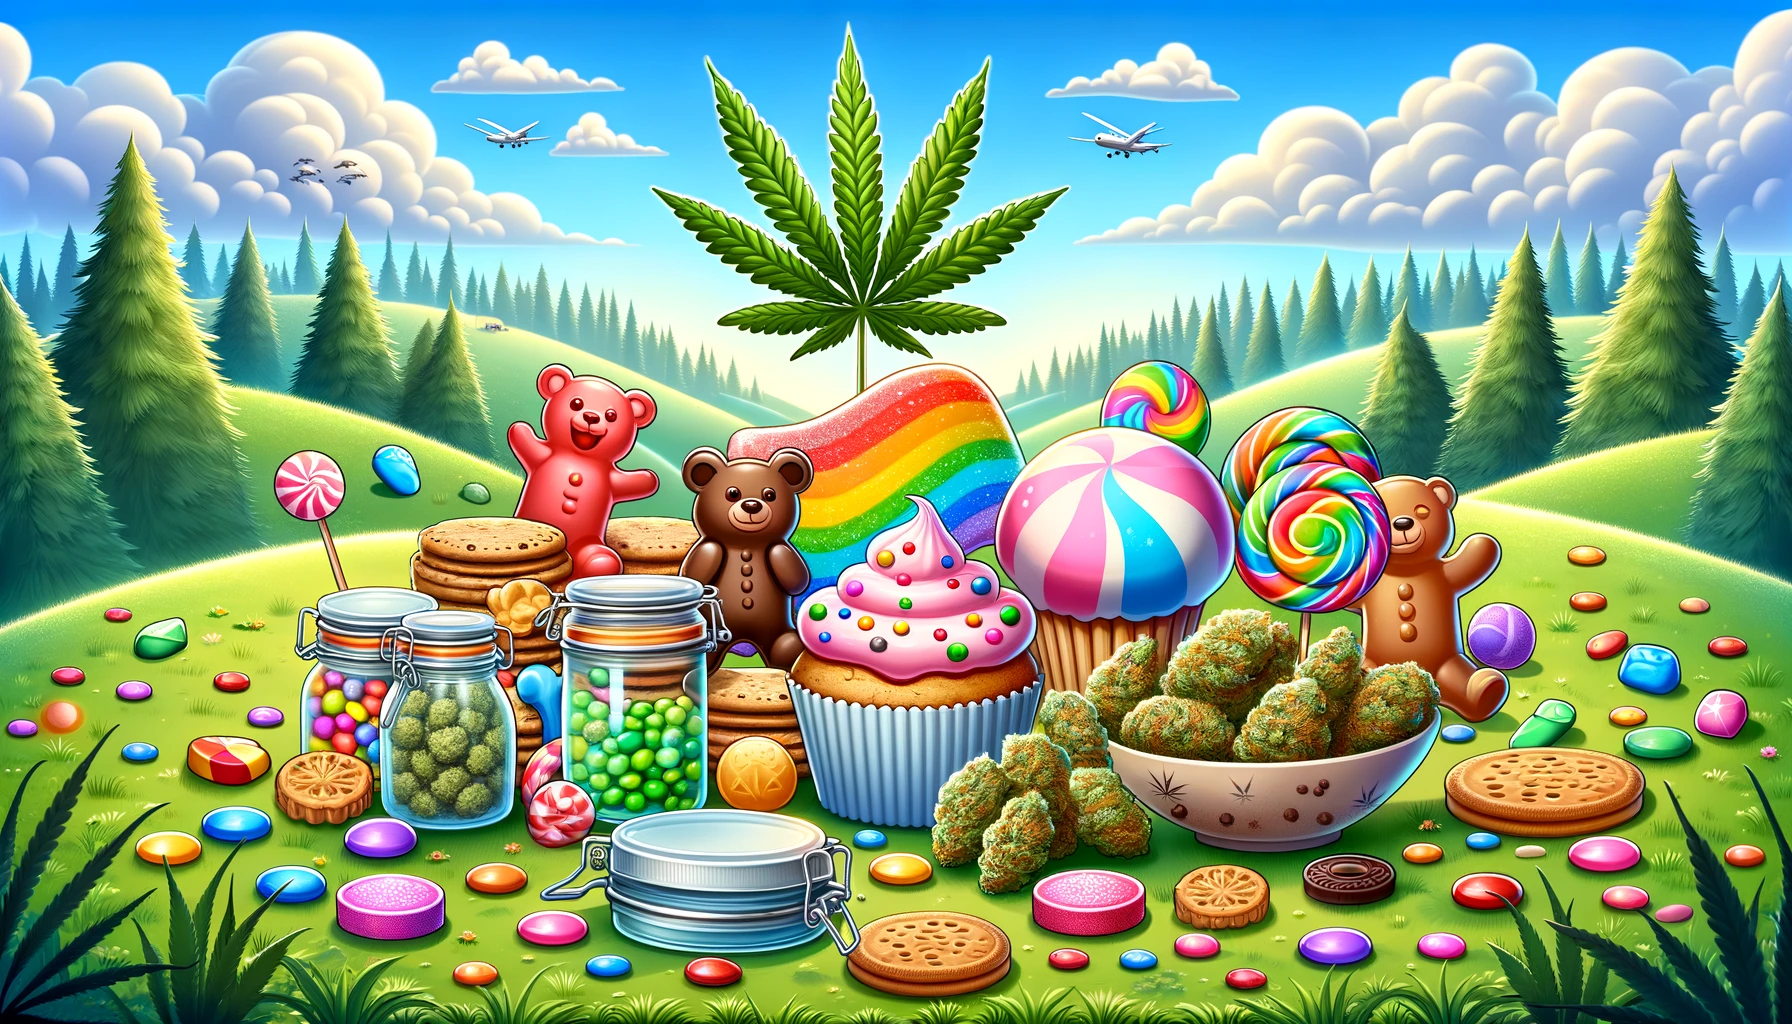 An Image showing Myths and misconcept about Edibles